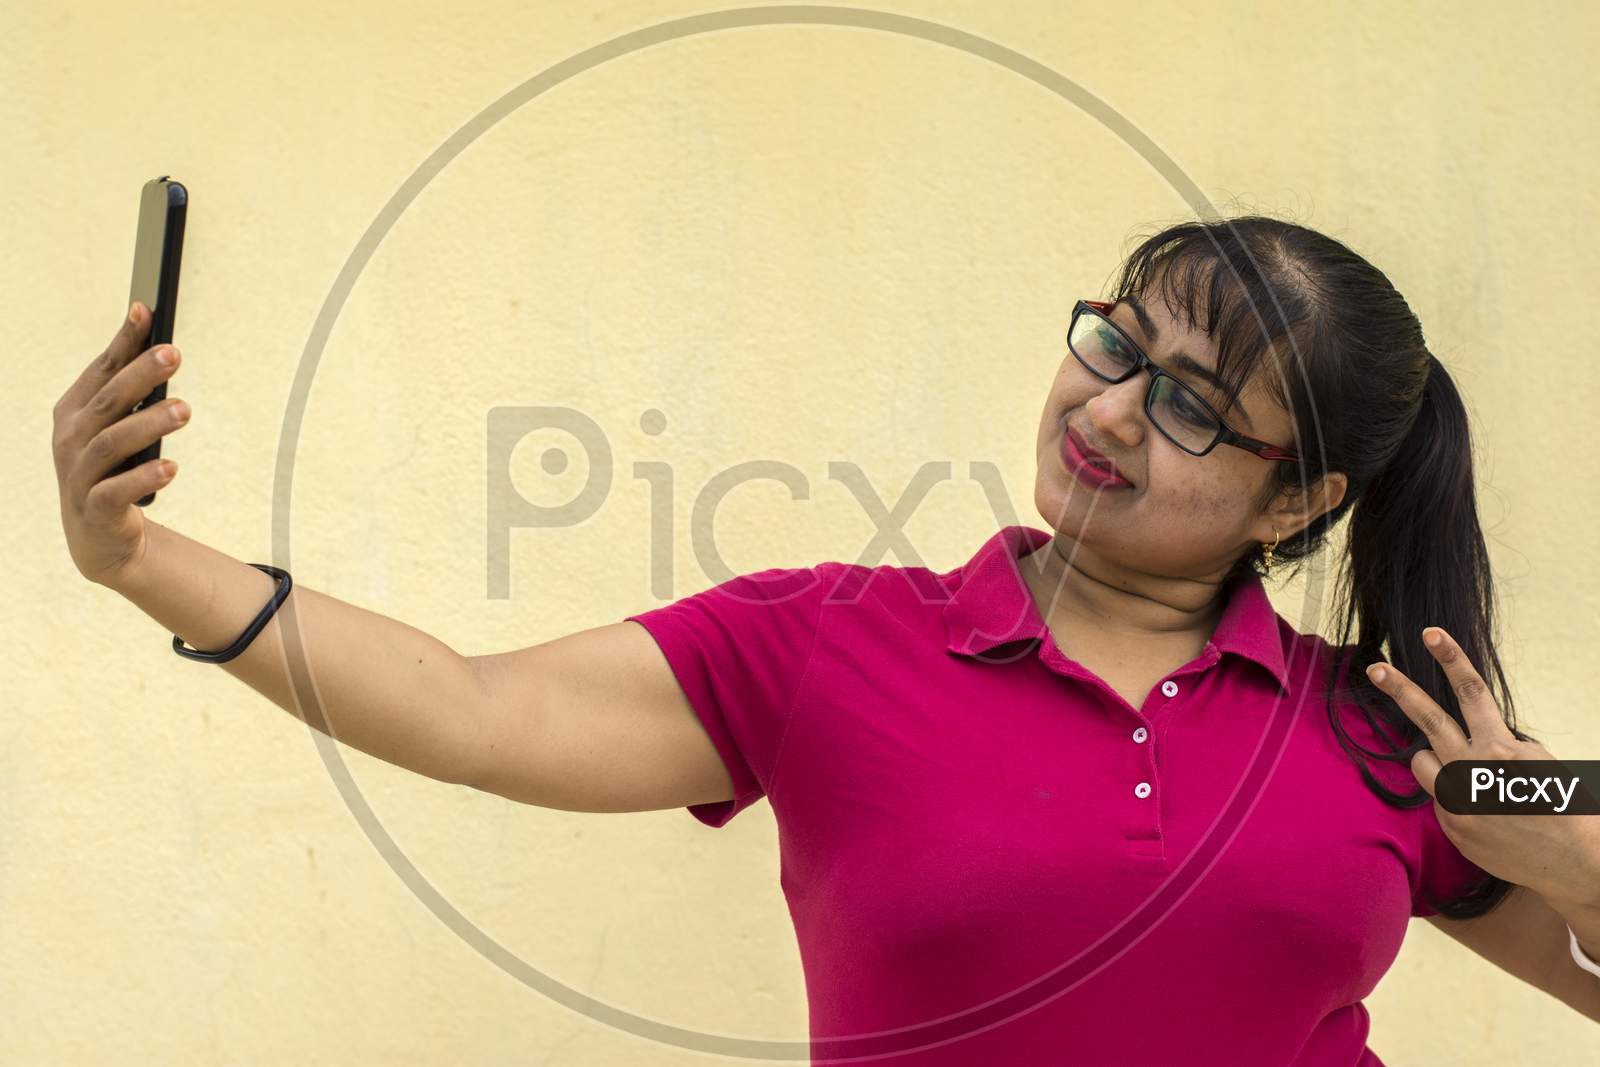 Indian Female Model Looking At Mobile Phone Taking Selfie Happily With Slight Smiling Face In Yellow Background With Copy Space For Text